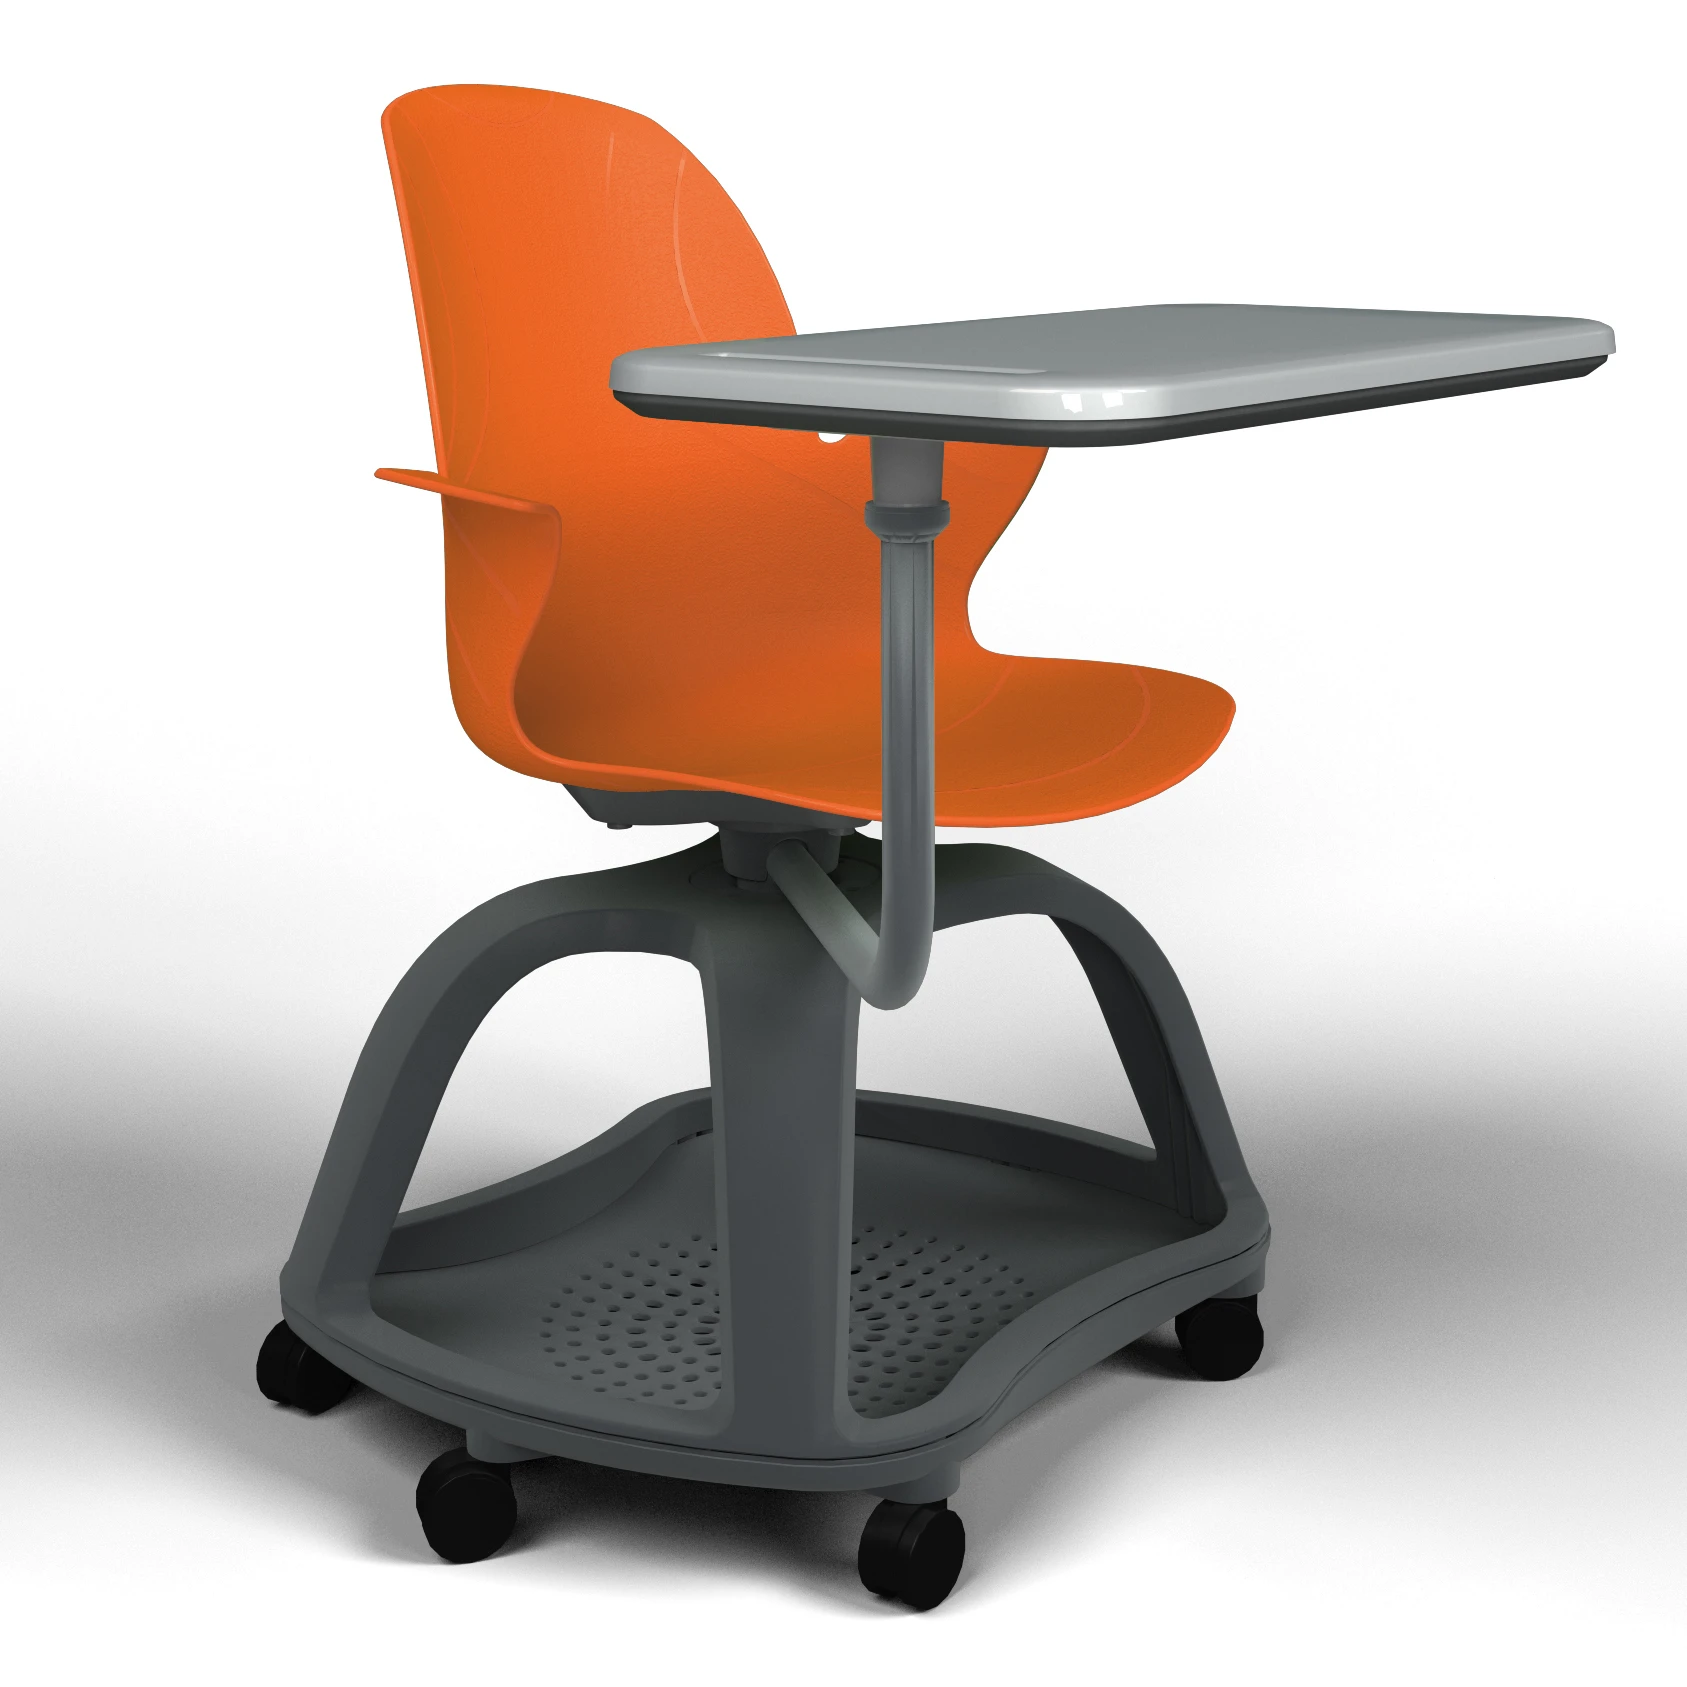 MOST DURABLE & FUNCTIONAL  STUDENT CHAIR WITH MOBILE WRITING TABLET - SPICE ORANGE